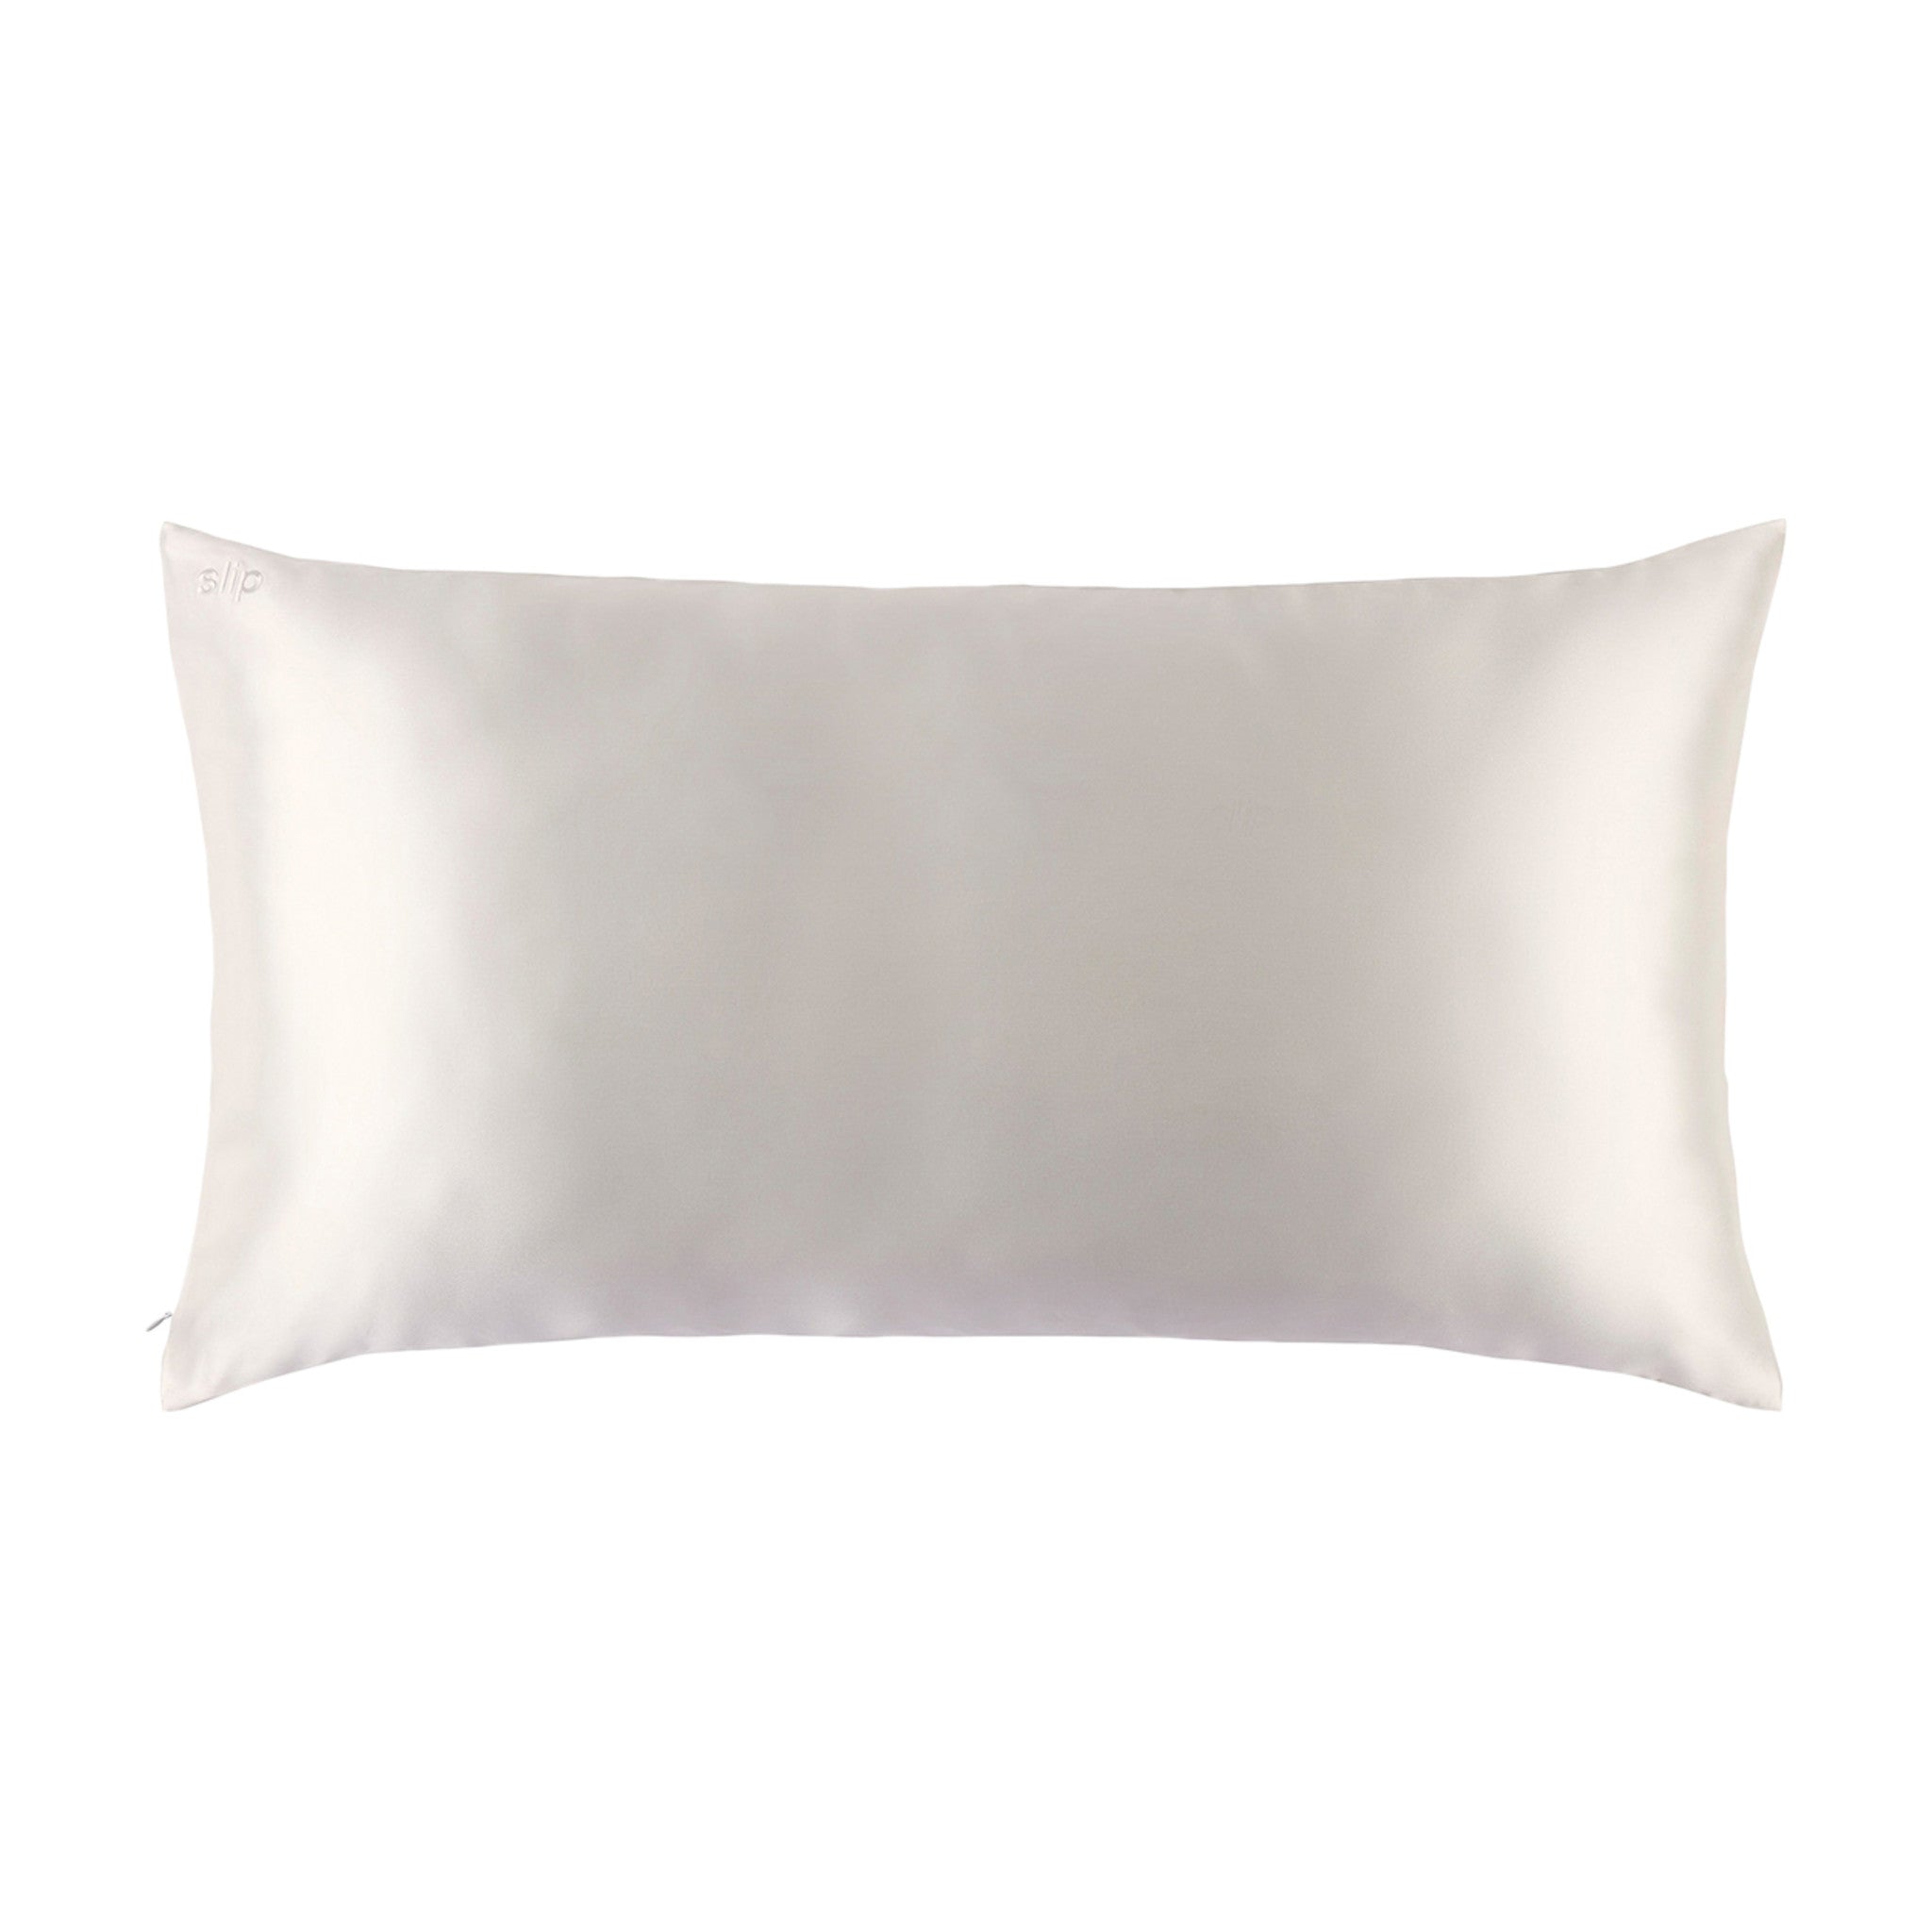 Up To 43% Off on Nestl Throw Pillow Inserts 